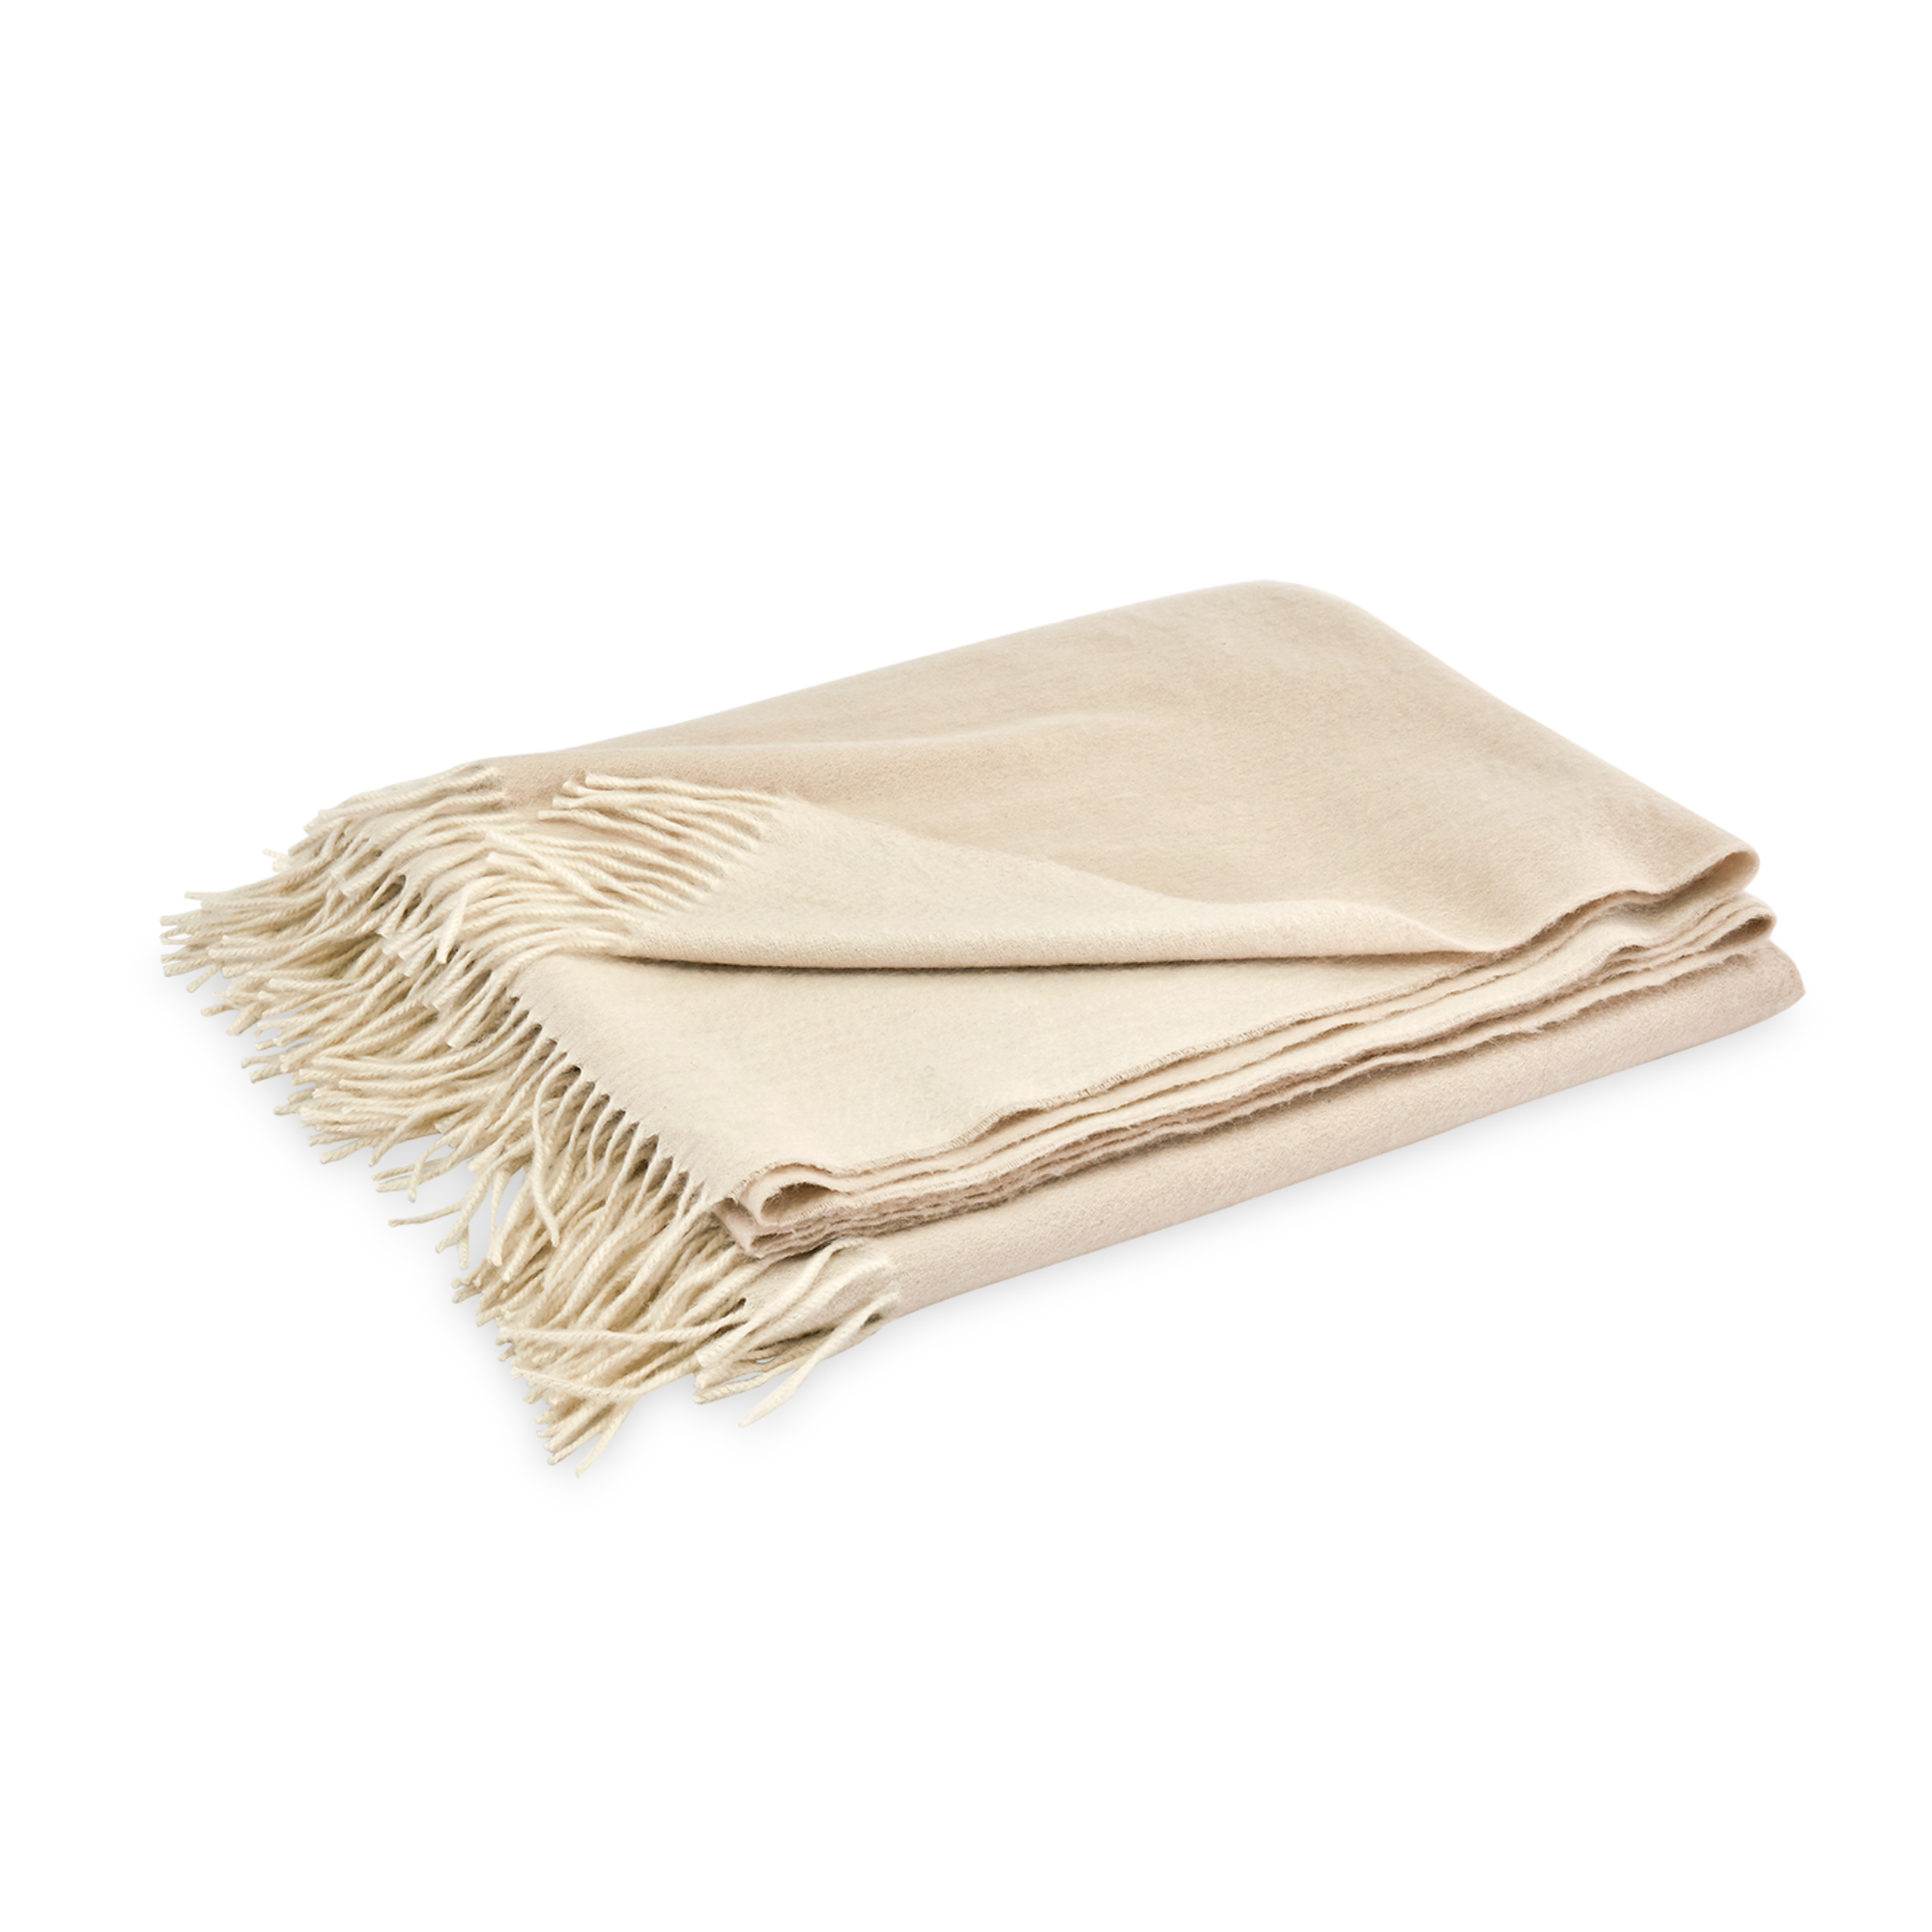 Folded Matouk Paley Throws in Bone and Parchment Color